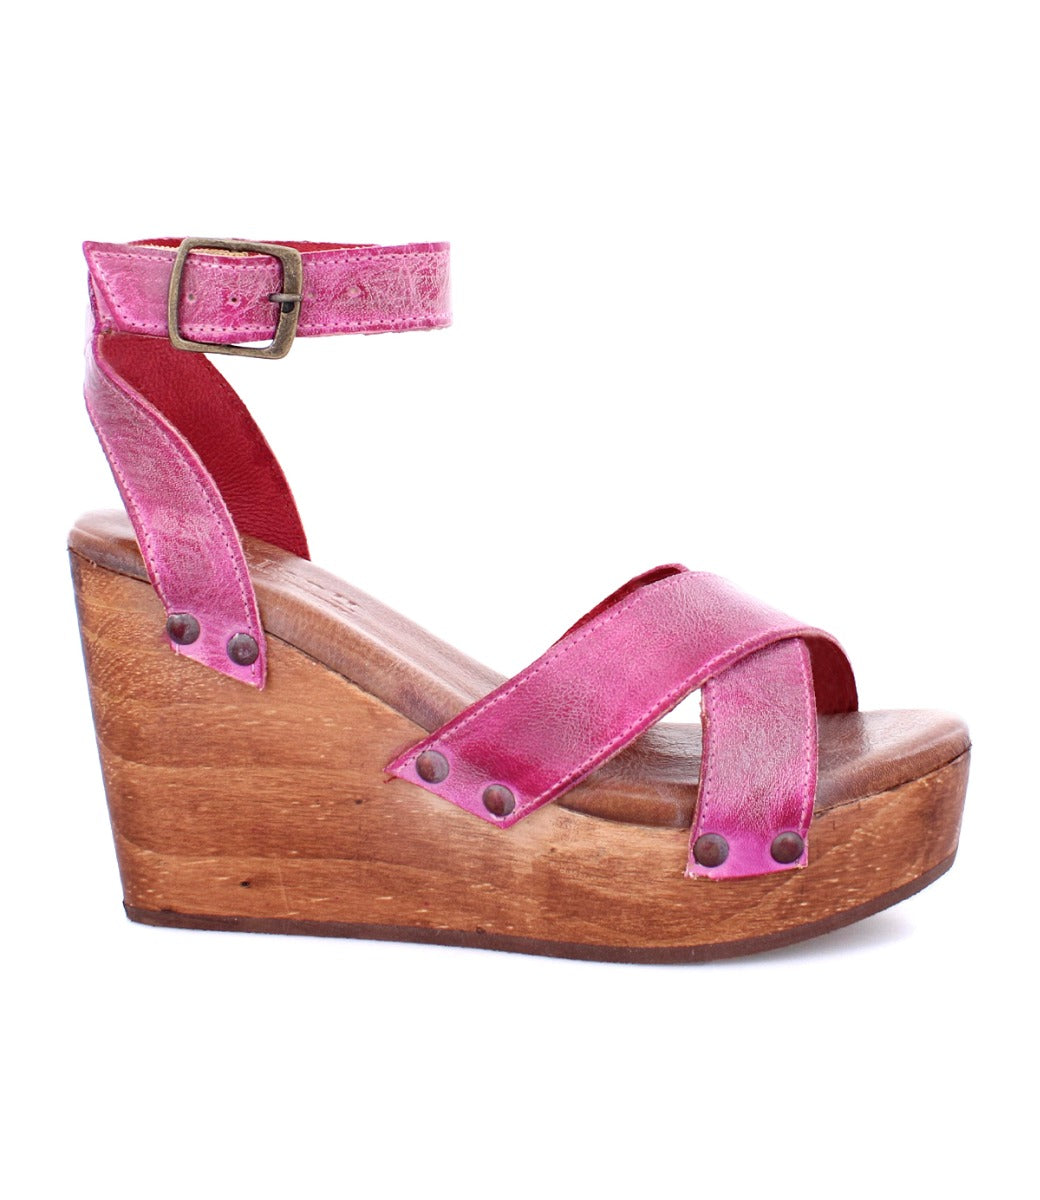 A women's Grettell pink wedge sandal with wooden platform made by Bed Stu.